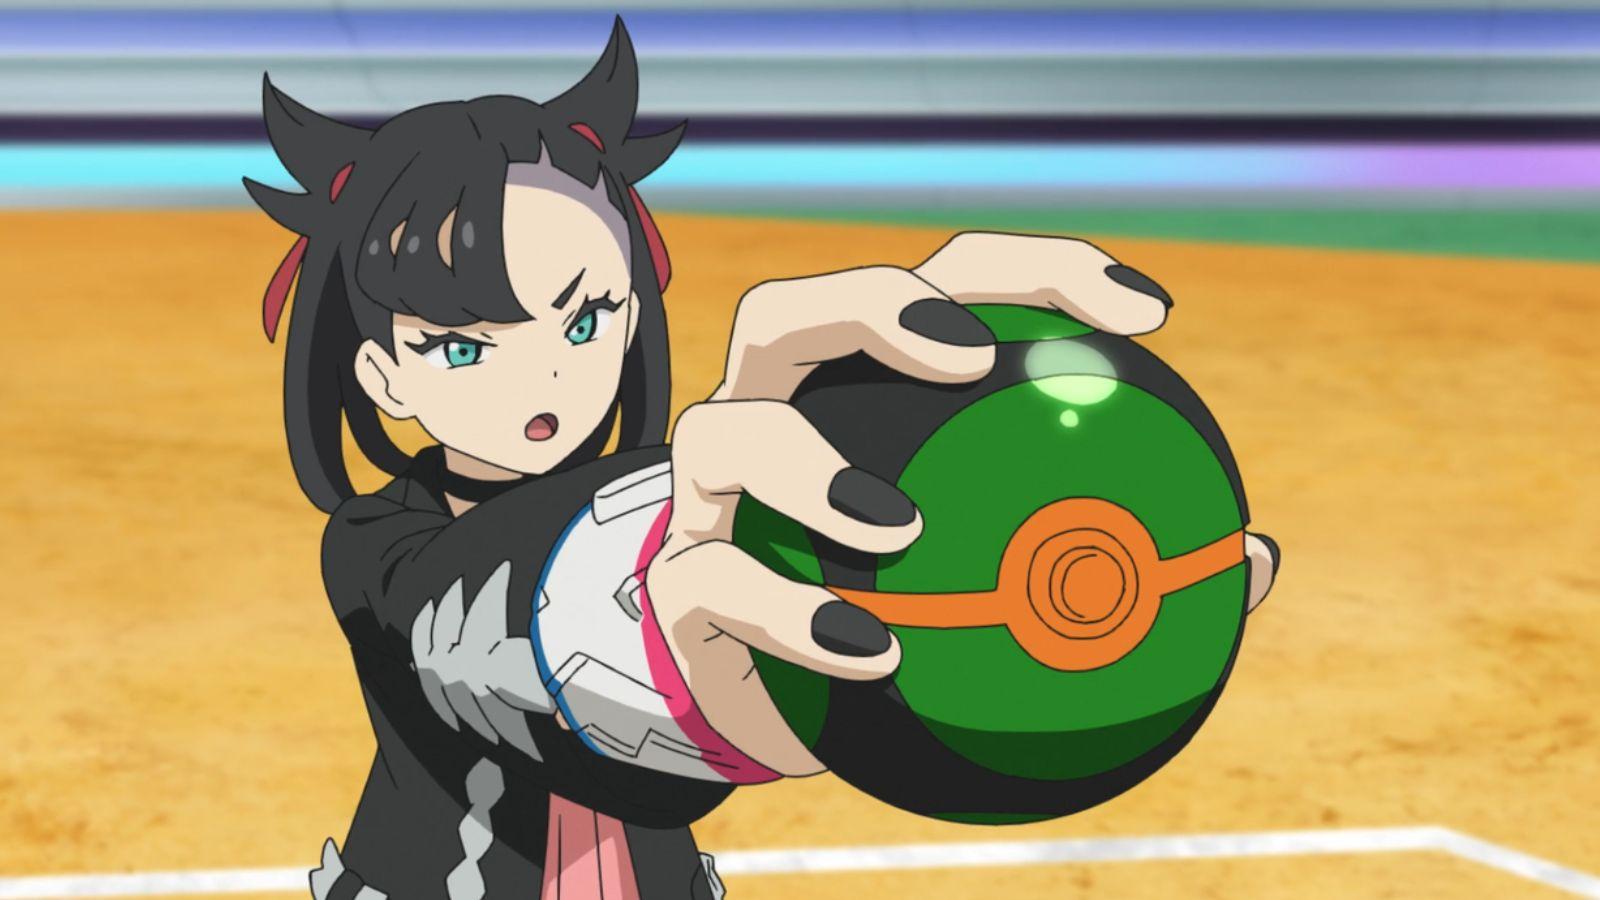 Marnie Dynamax band and Dusk Ball from Pokemon anime.